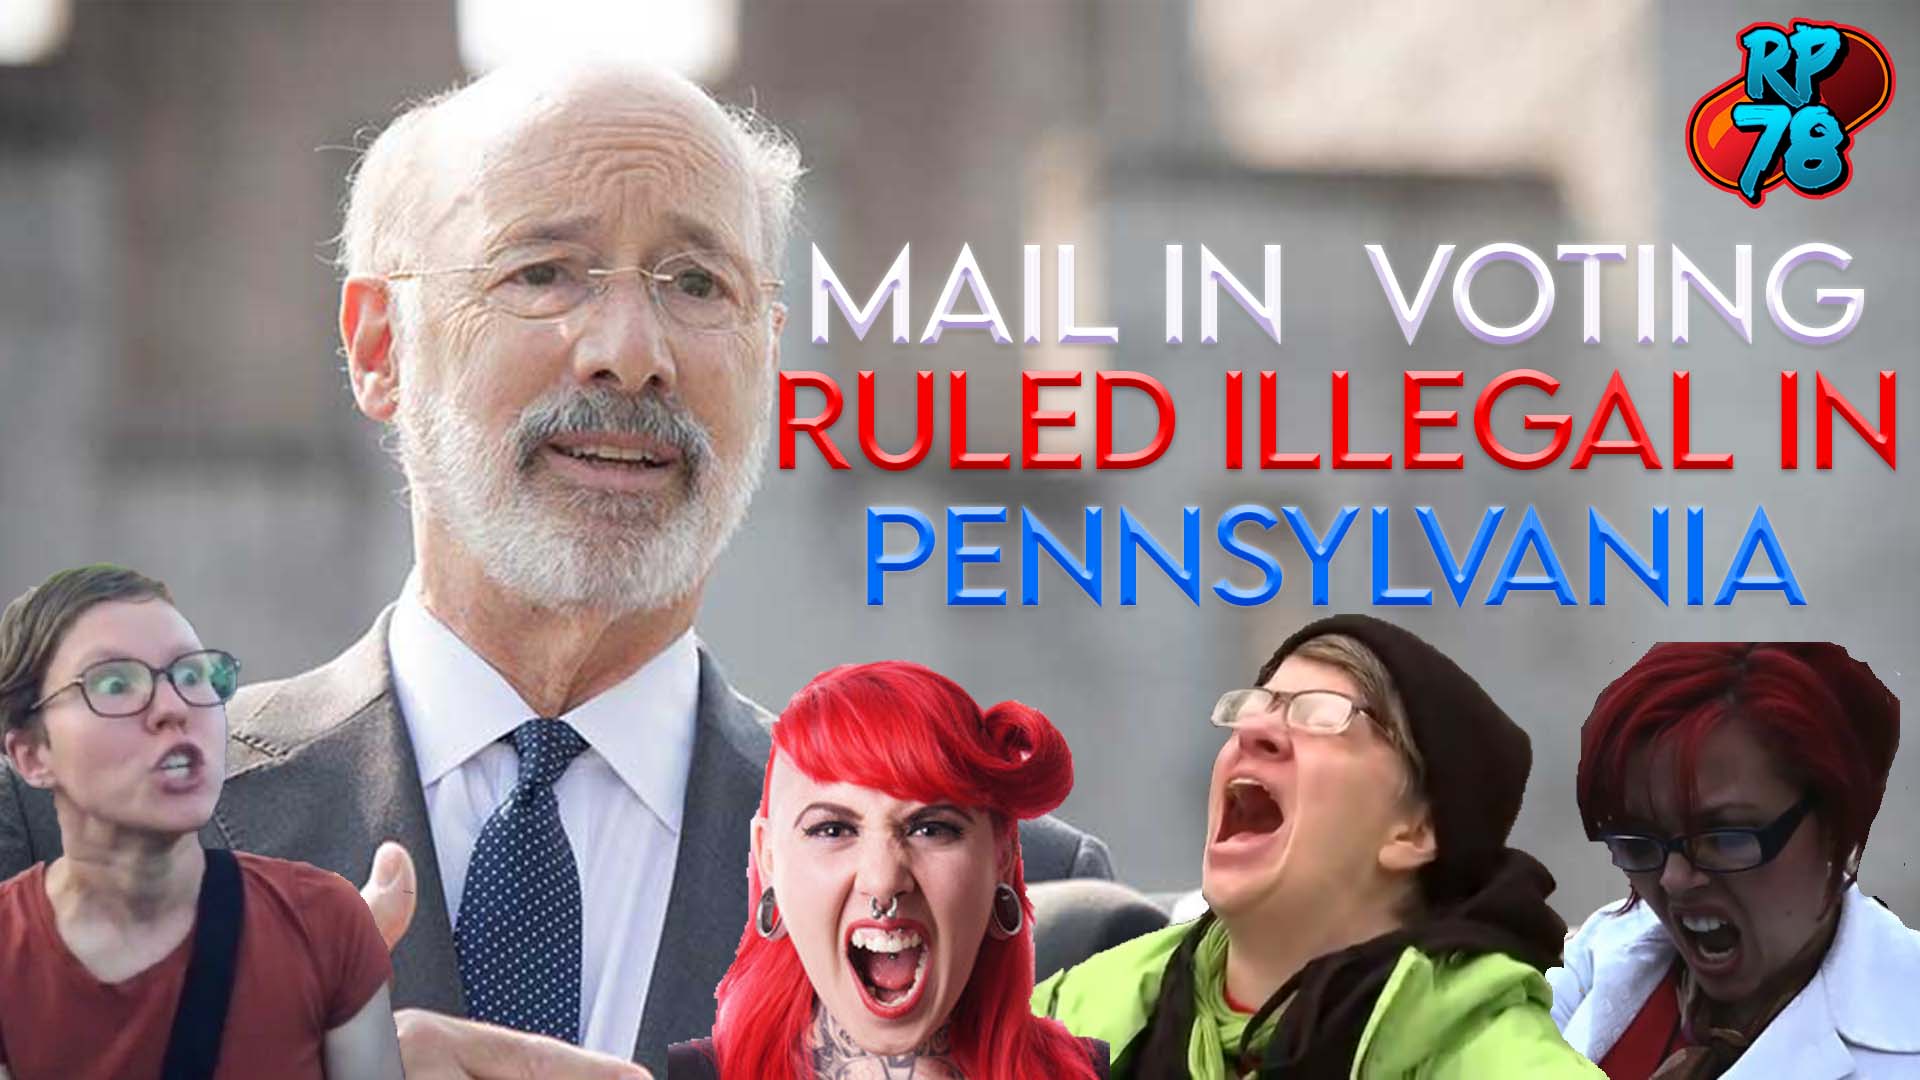 PA Overturns Mail In Voting!!!